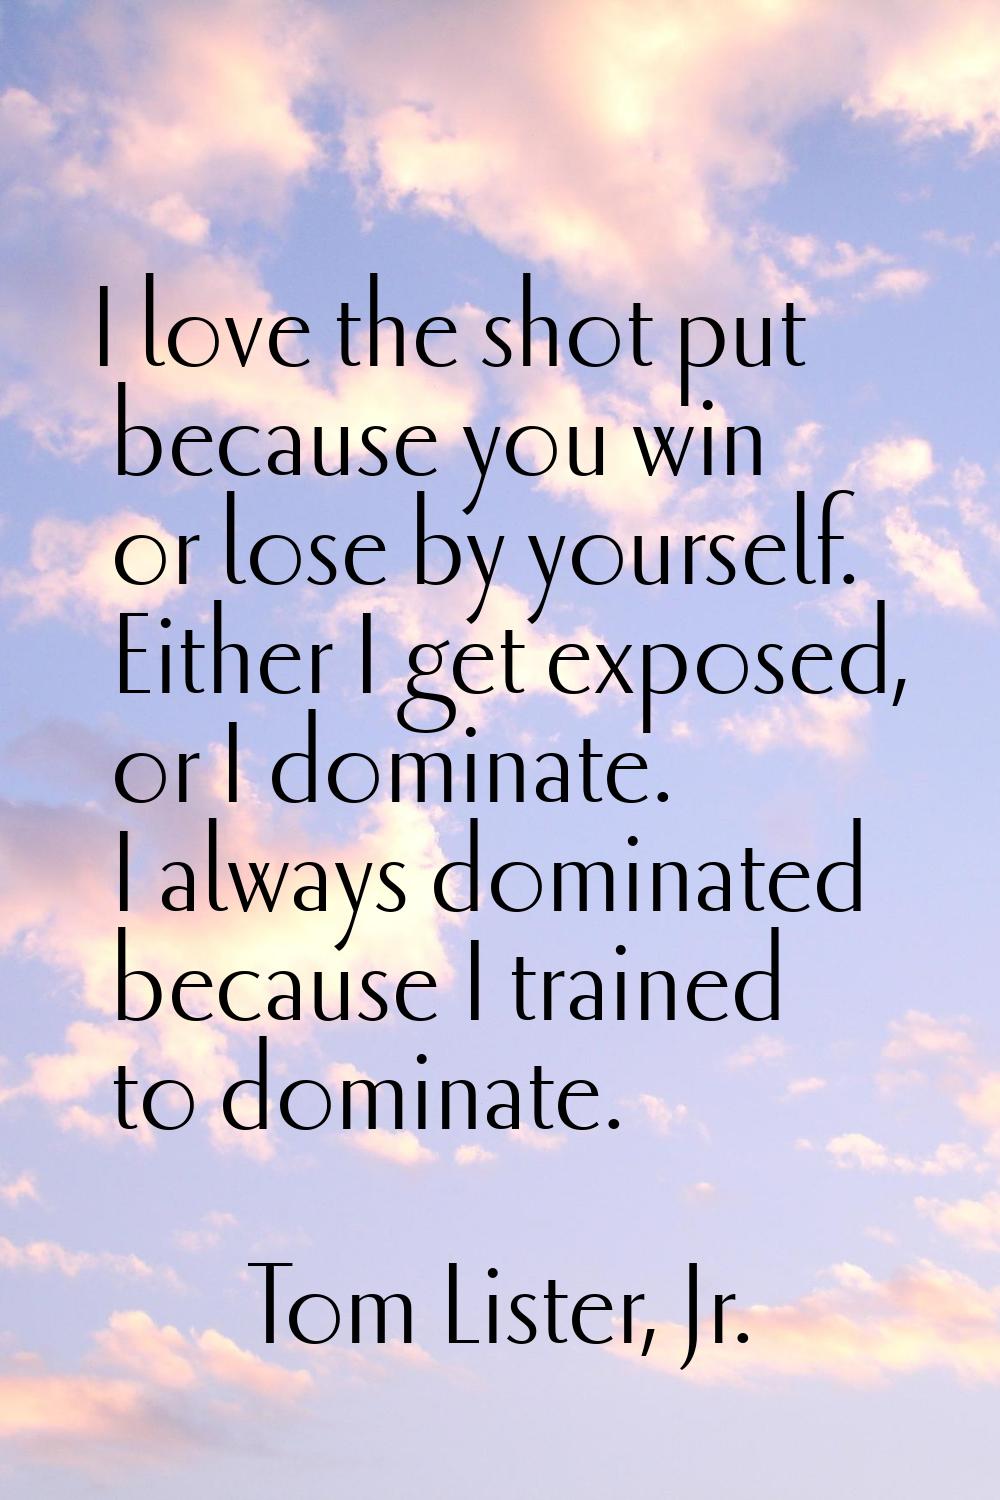 I love the shot put because you win or lose by yourself. Either I get exposed, or I dominate. I alw